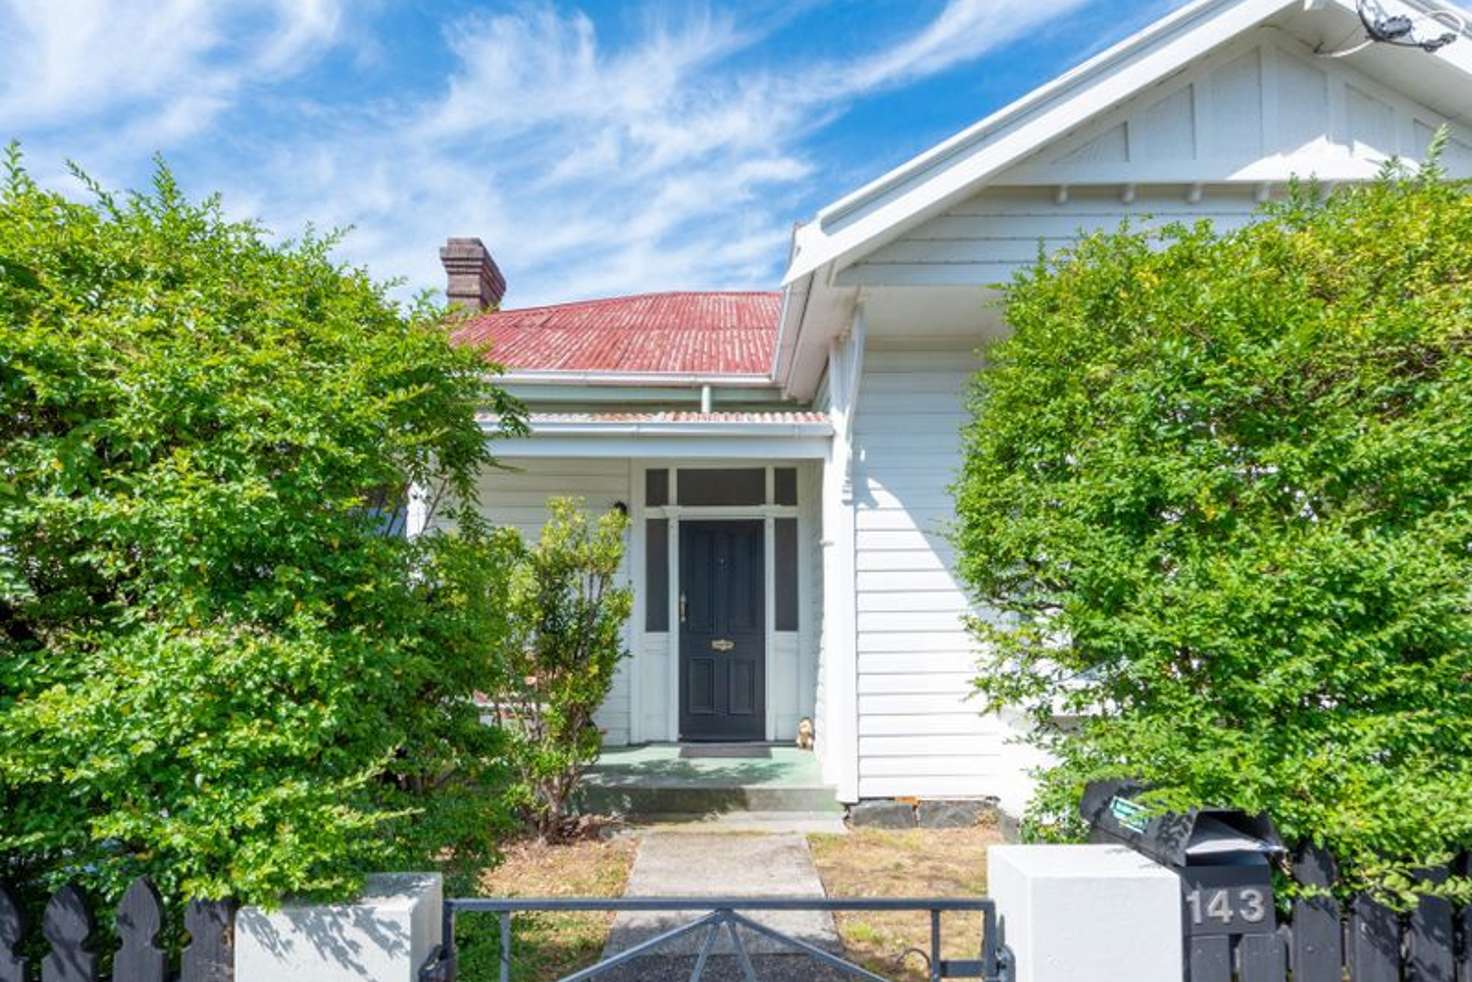 Main view of Homely house listing, 143 High Street, Newstead TAS 7250